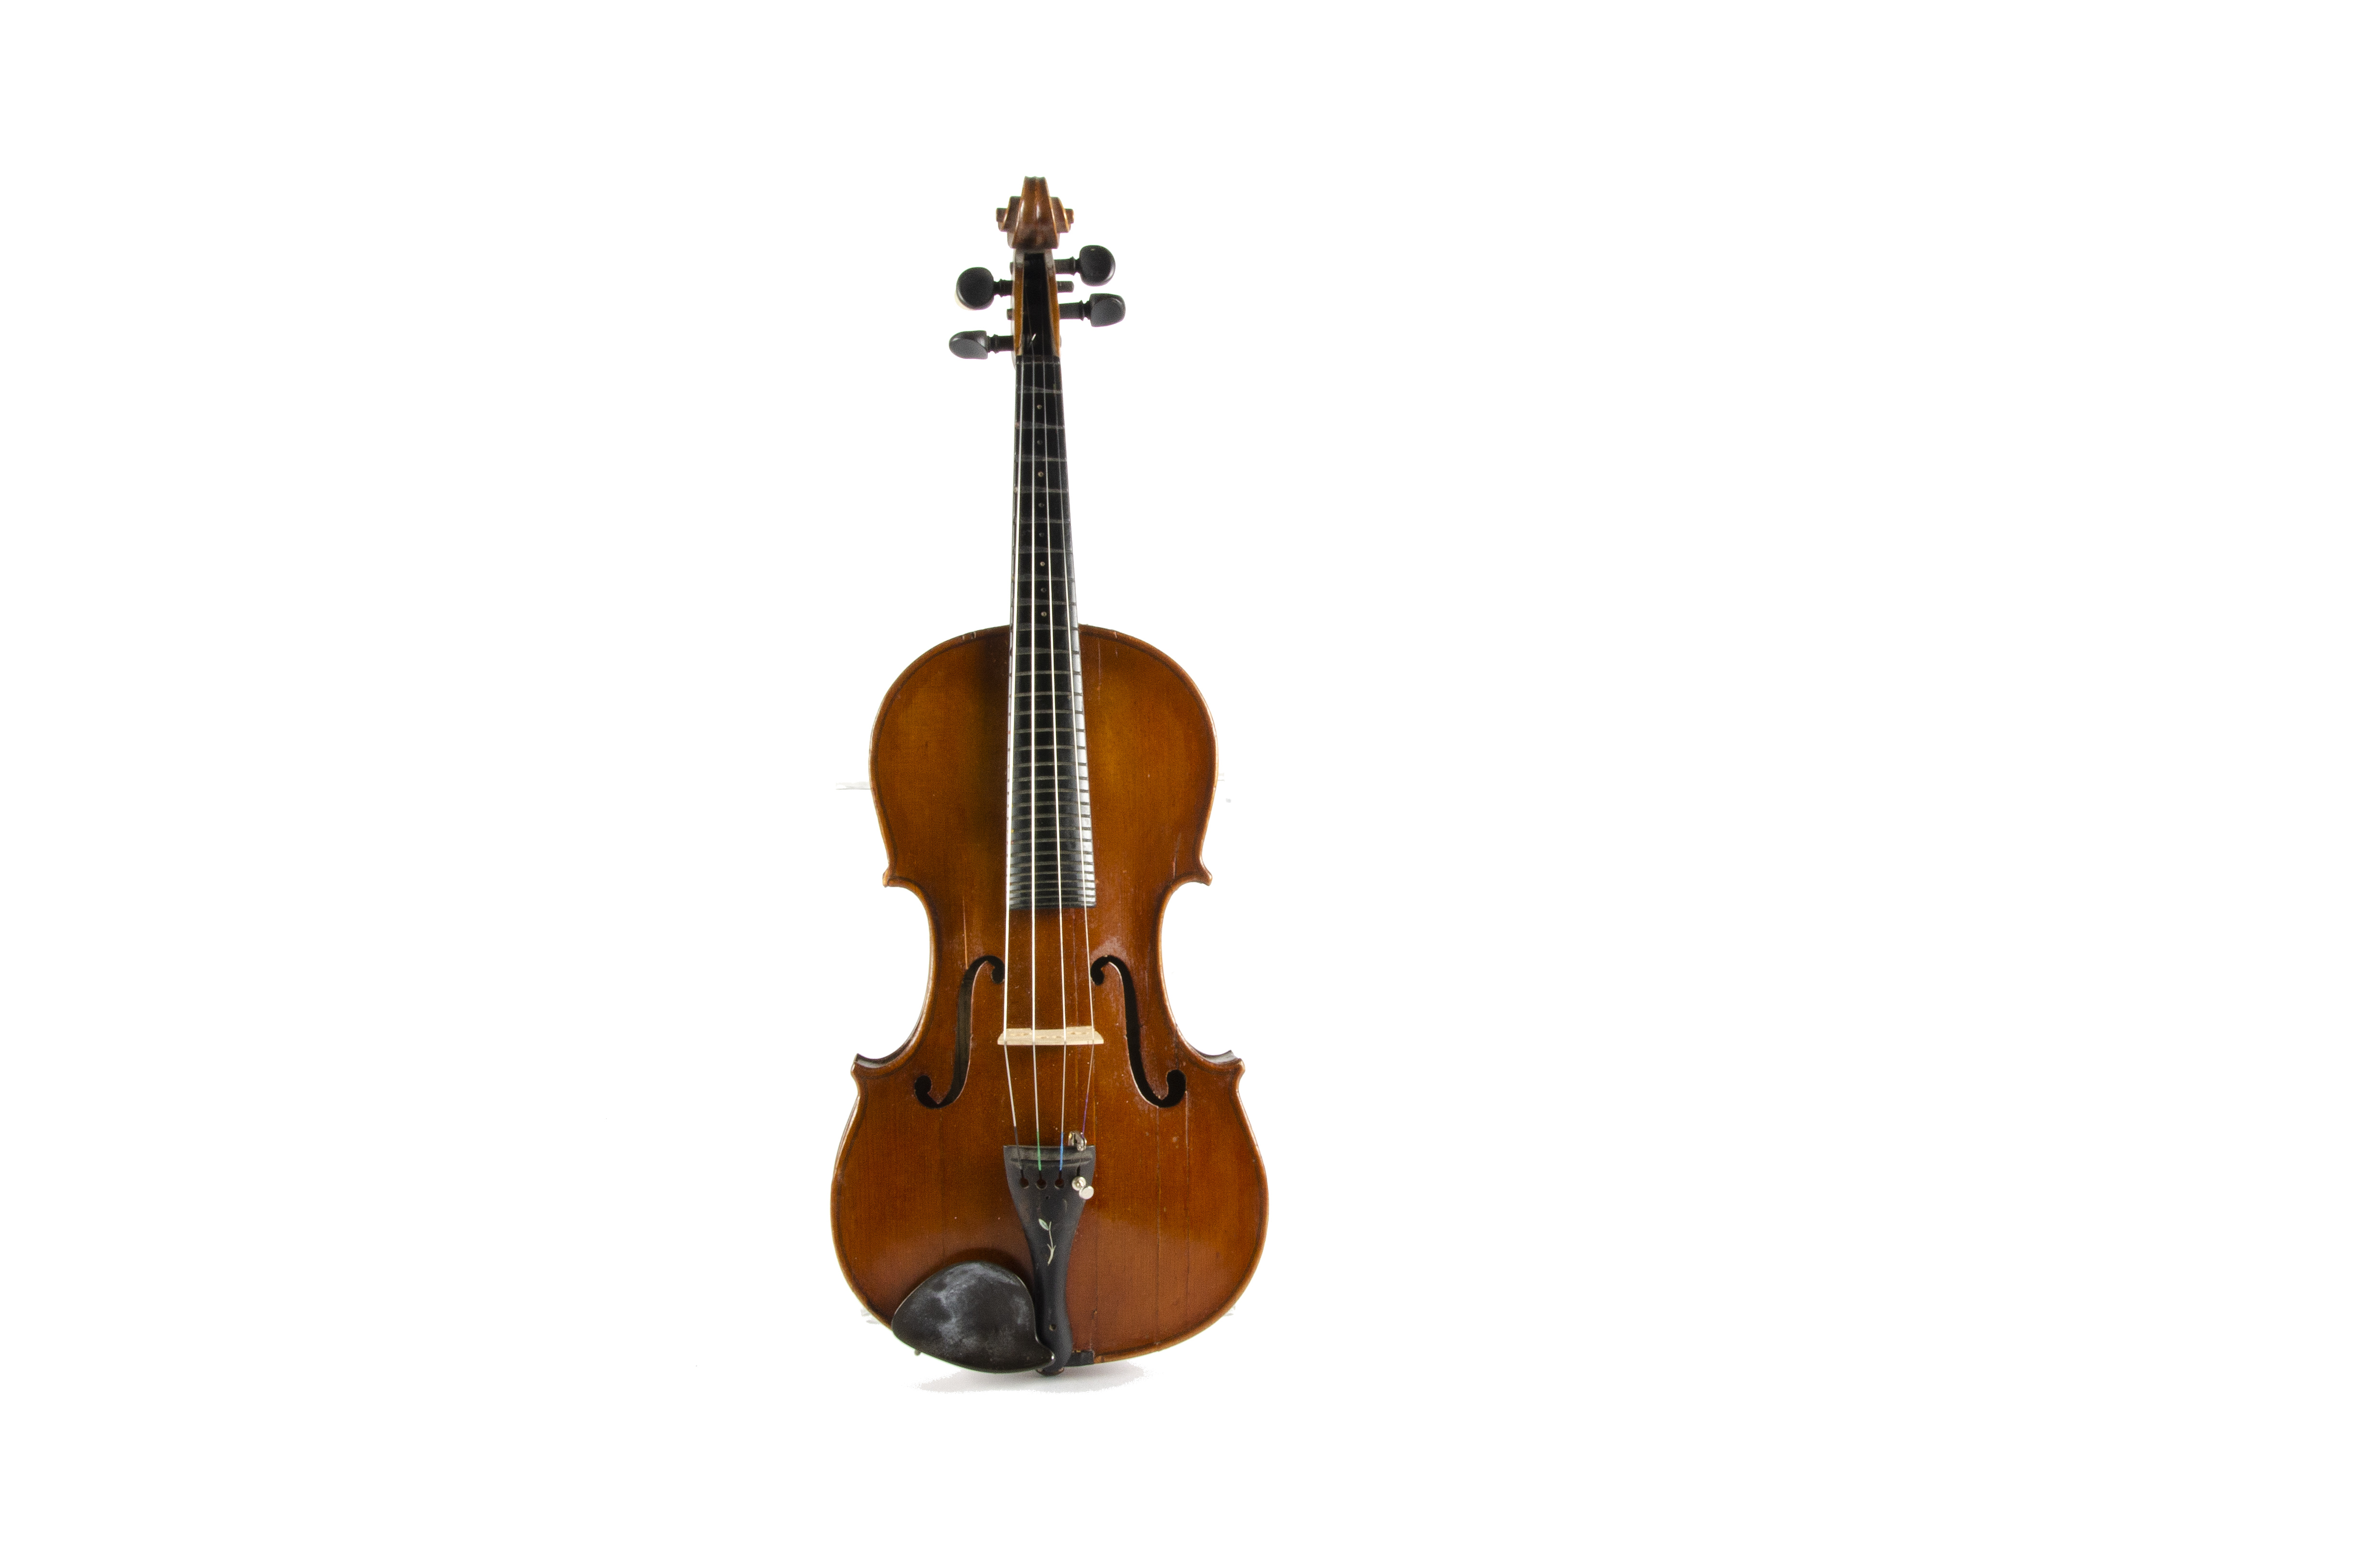 Violin, Manby violin with grooved fingerboard 14", labelled 'The London MANBY Violin Co, Ltd, 23